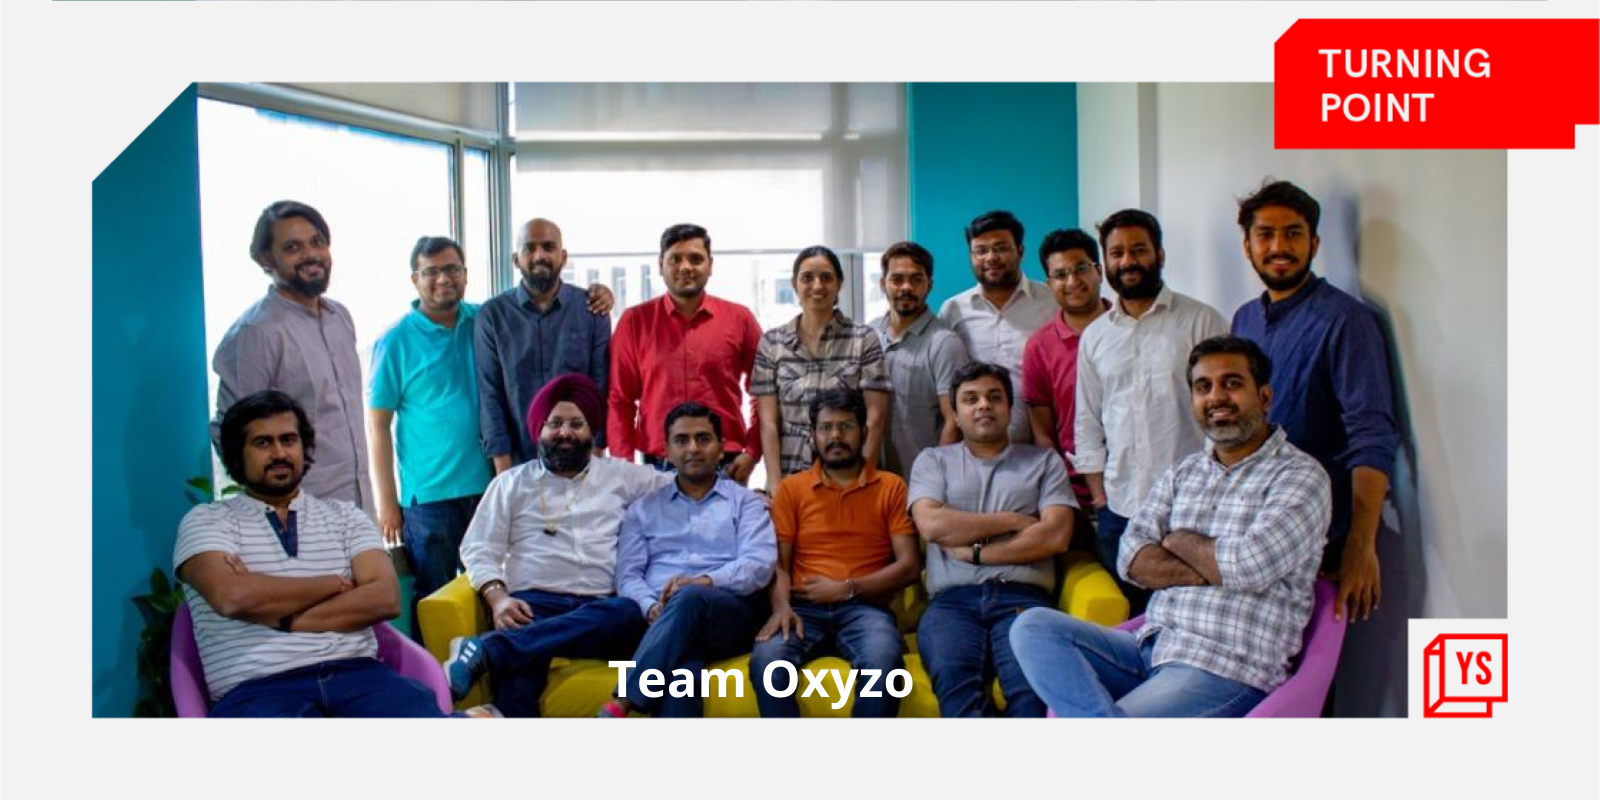 [The Turning Point] How Oxyzo stepped out of its parent company’s shadow with India’s largest ever Series A fundraise
